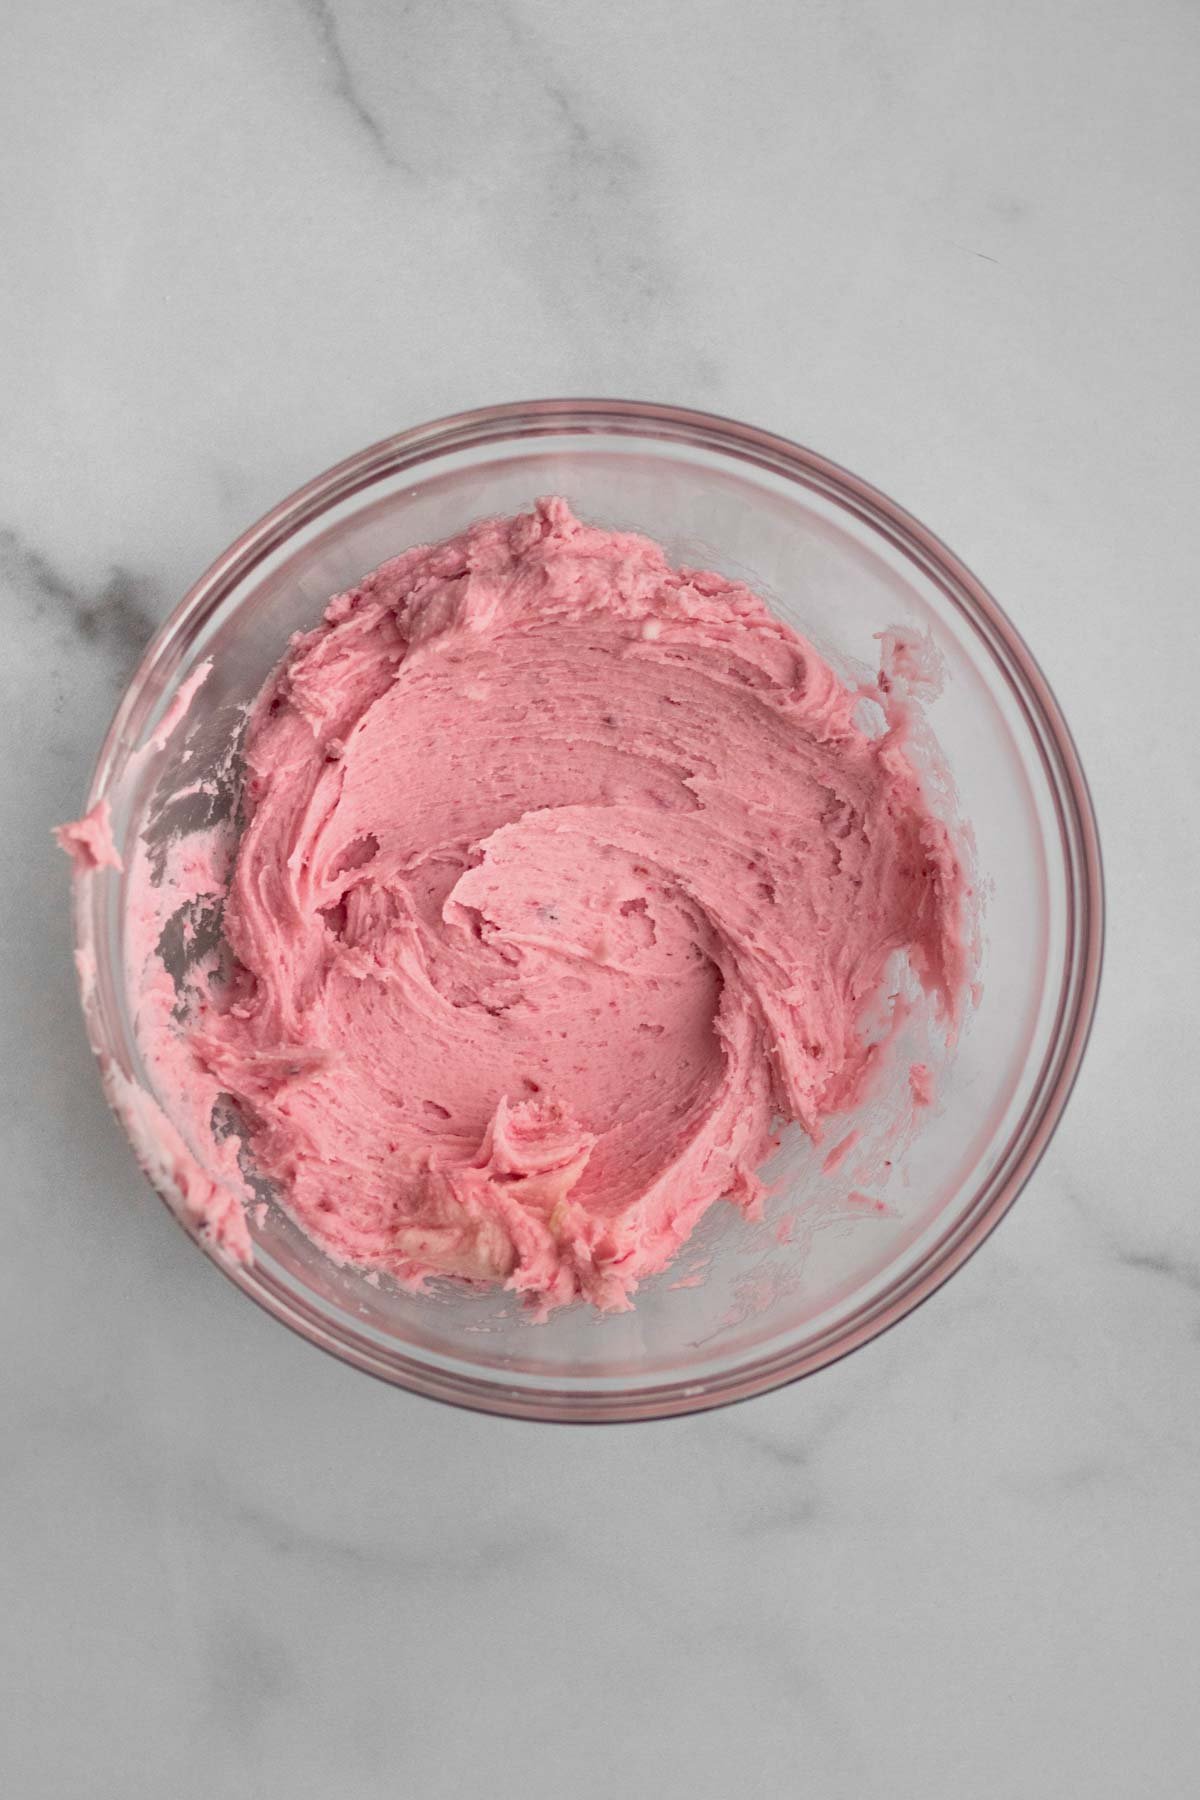 Mixing the ingredients to make raspberry frosting.